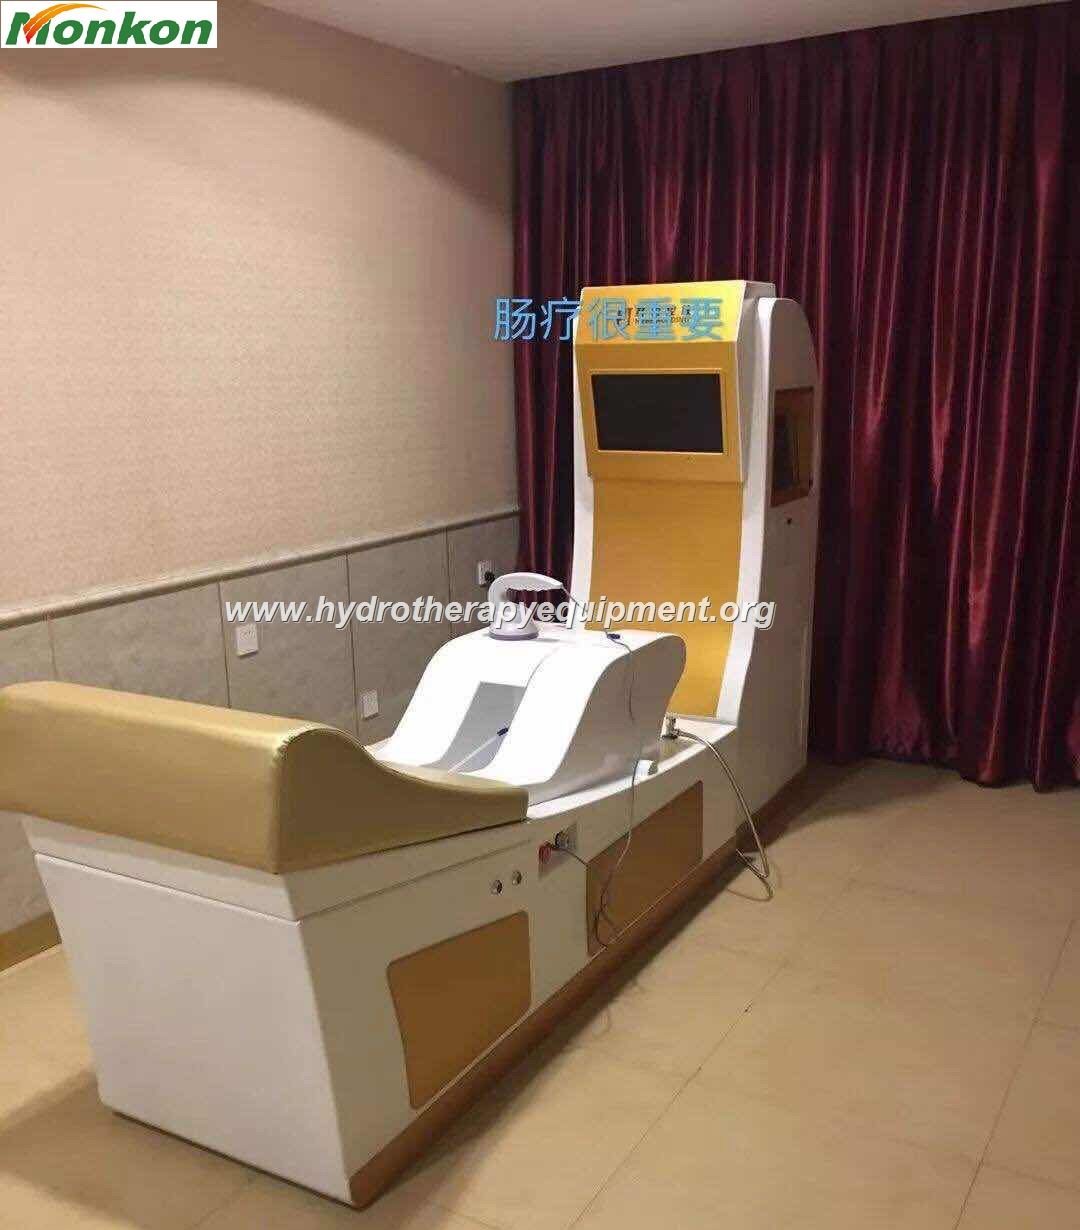 Colon Hydrotherapy Machine at Home